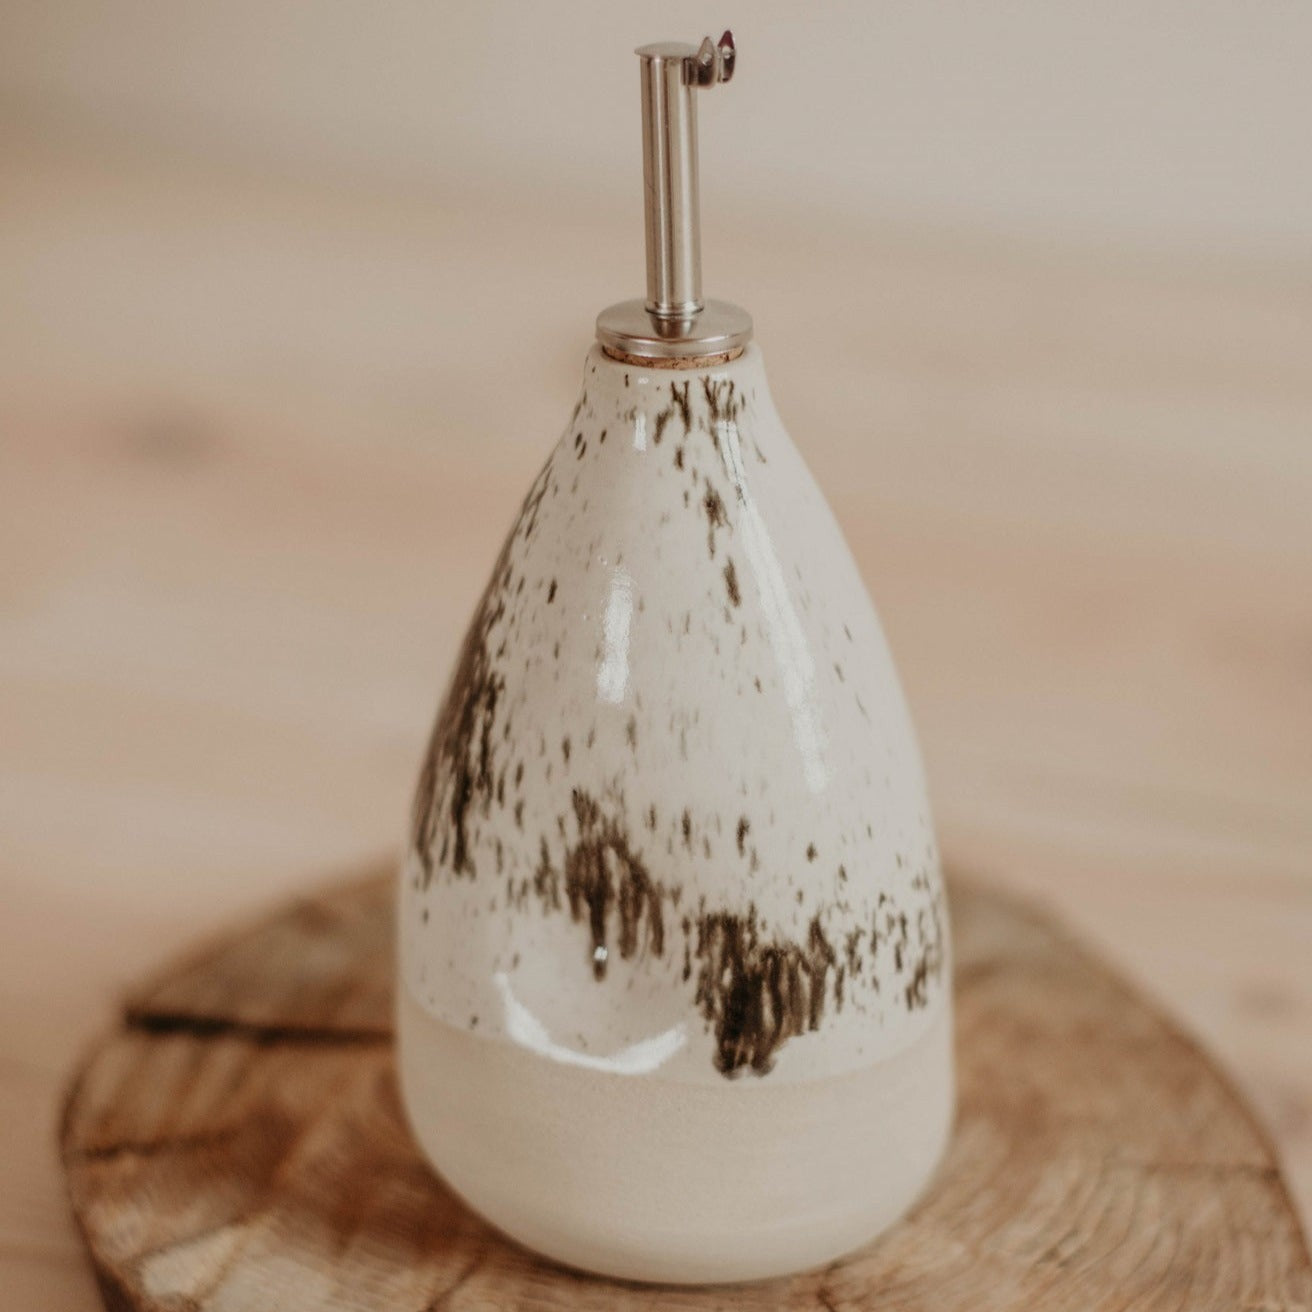 Rustic charm meets modern elegance with this stylish and functional ceramic oil bottle.